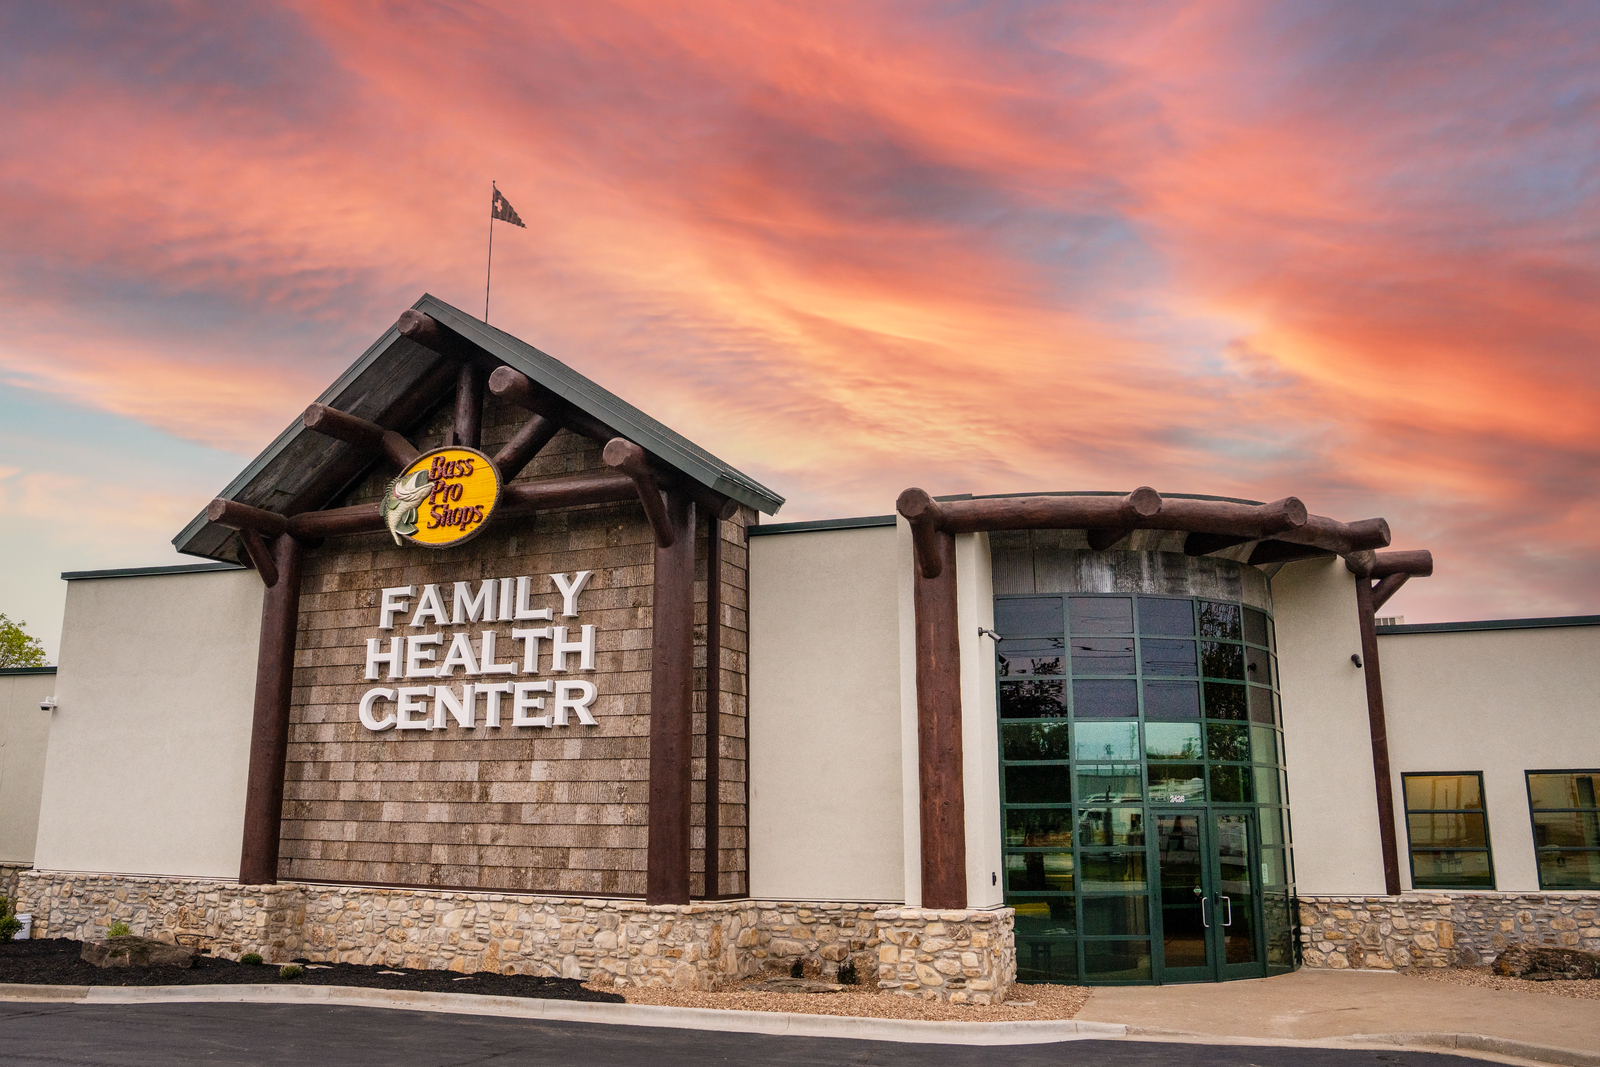 Bass Pro Shops celebrates the grand opening of its Family Health